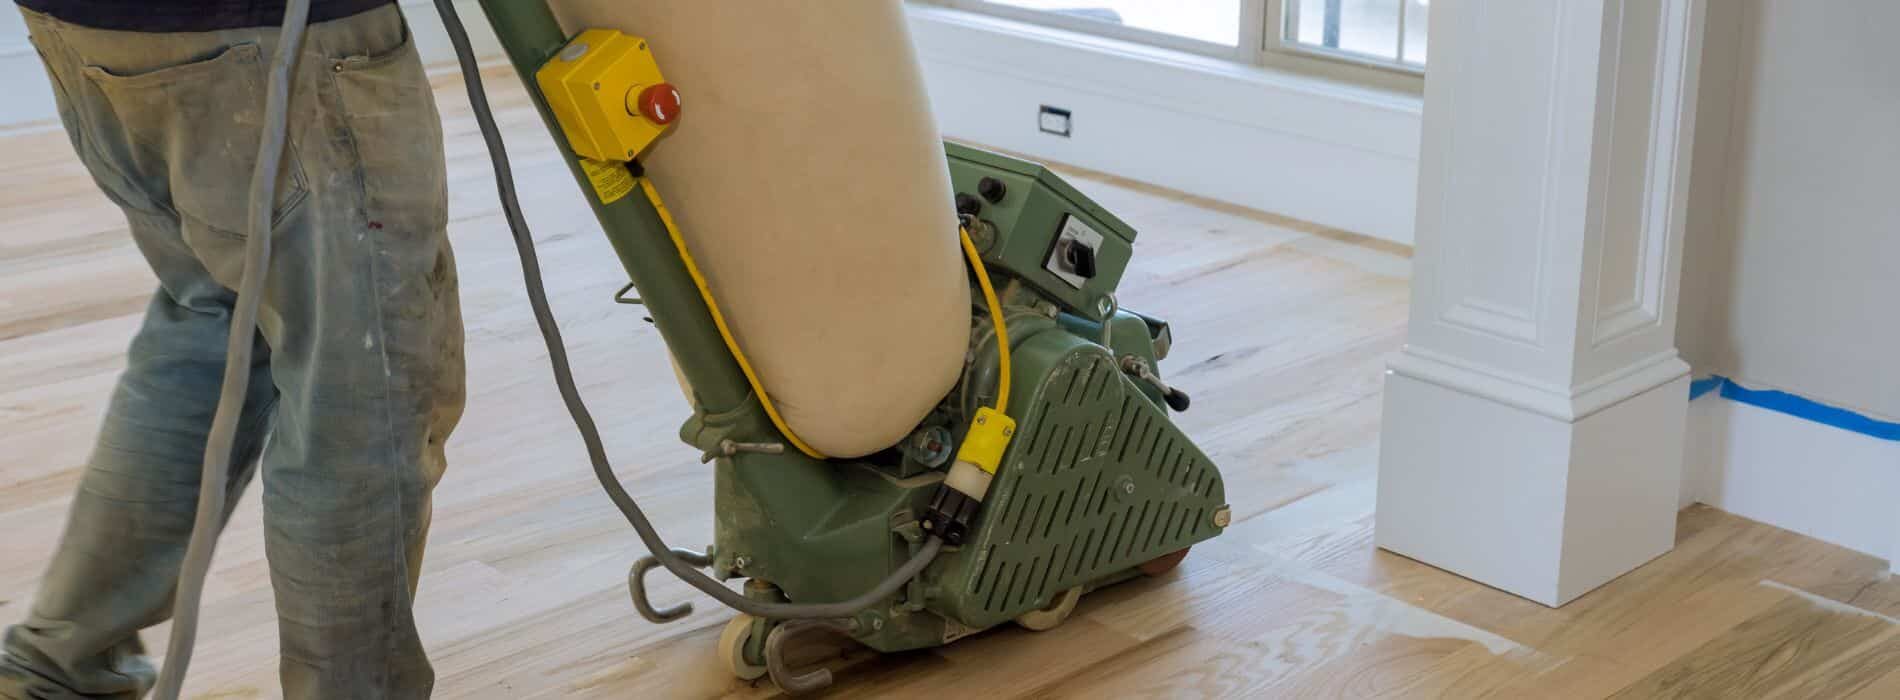 In Tottenham, N17, Mr Sander® use a Bona Scorpion drum sander (200mm, 1.5kW, 240V, 50Hz) with a HEPA-filtered dust extraction system for clean and efficient sanding of parquet floors.